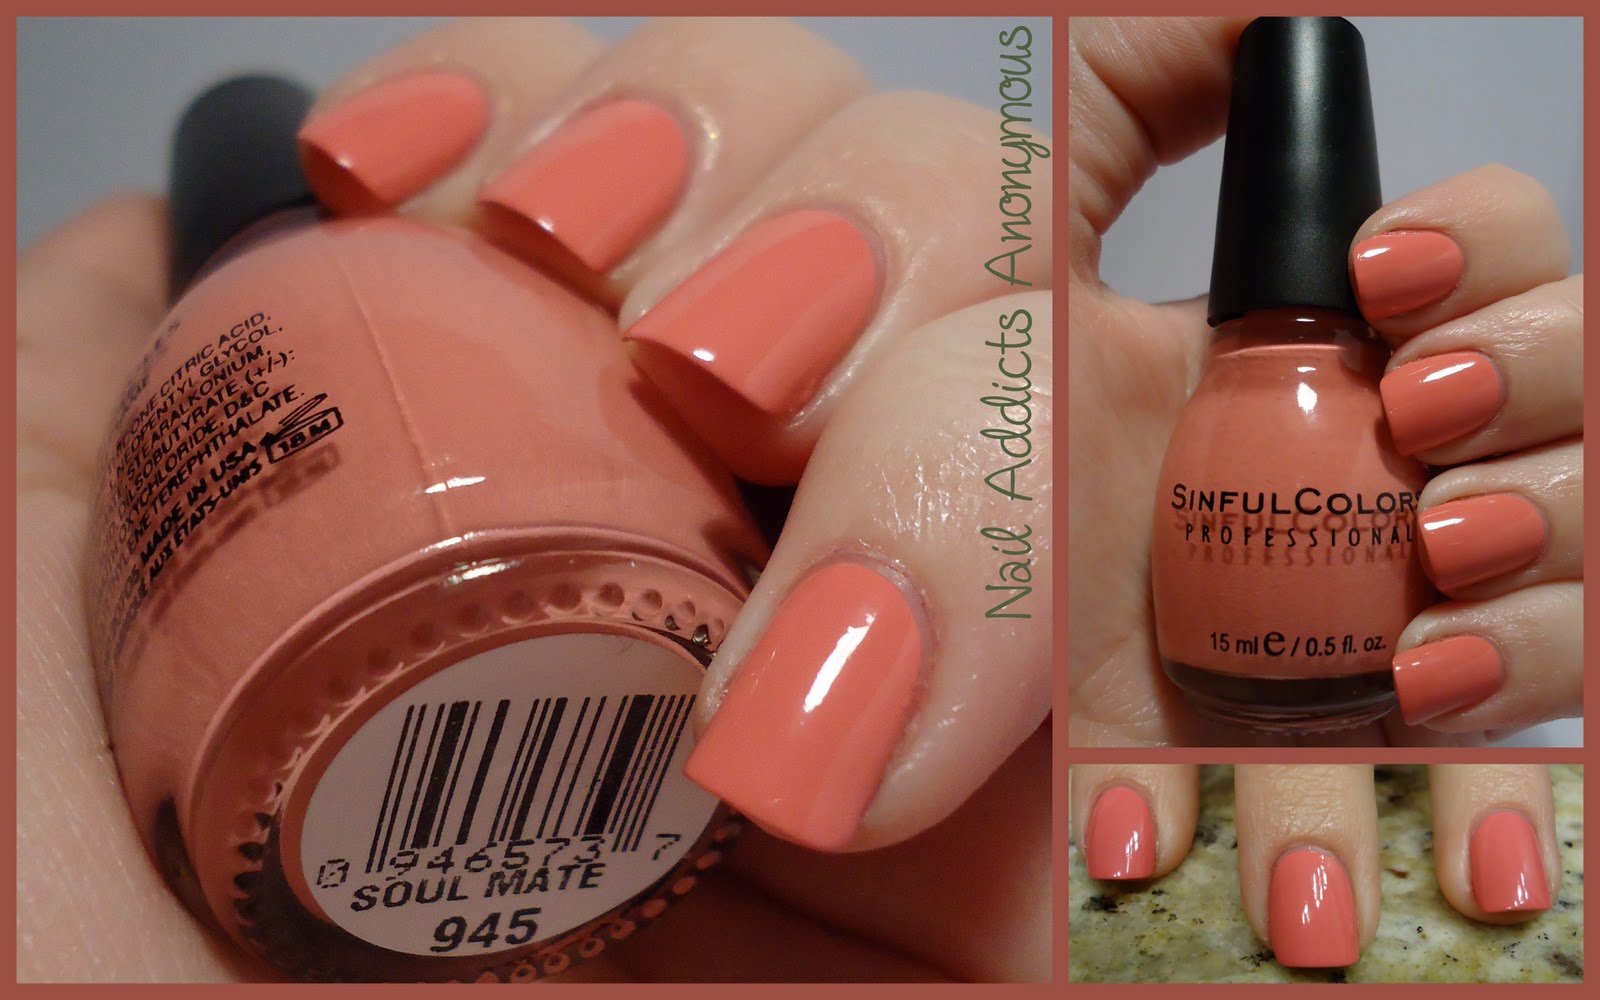 4. Sinful Colors Soulmate Nail Lacquer - wide 9